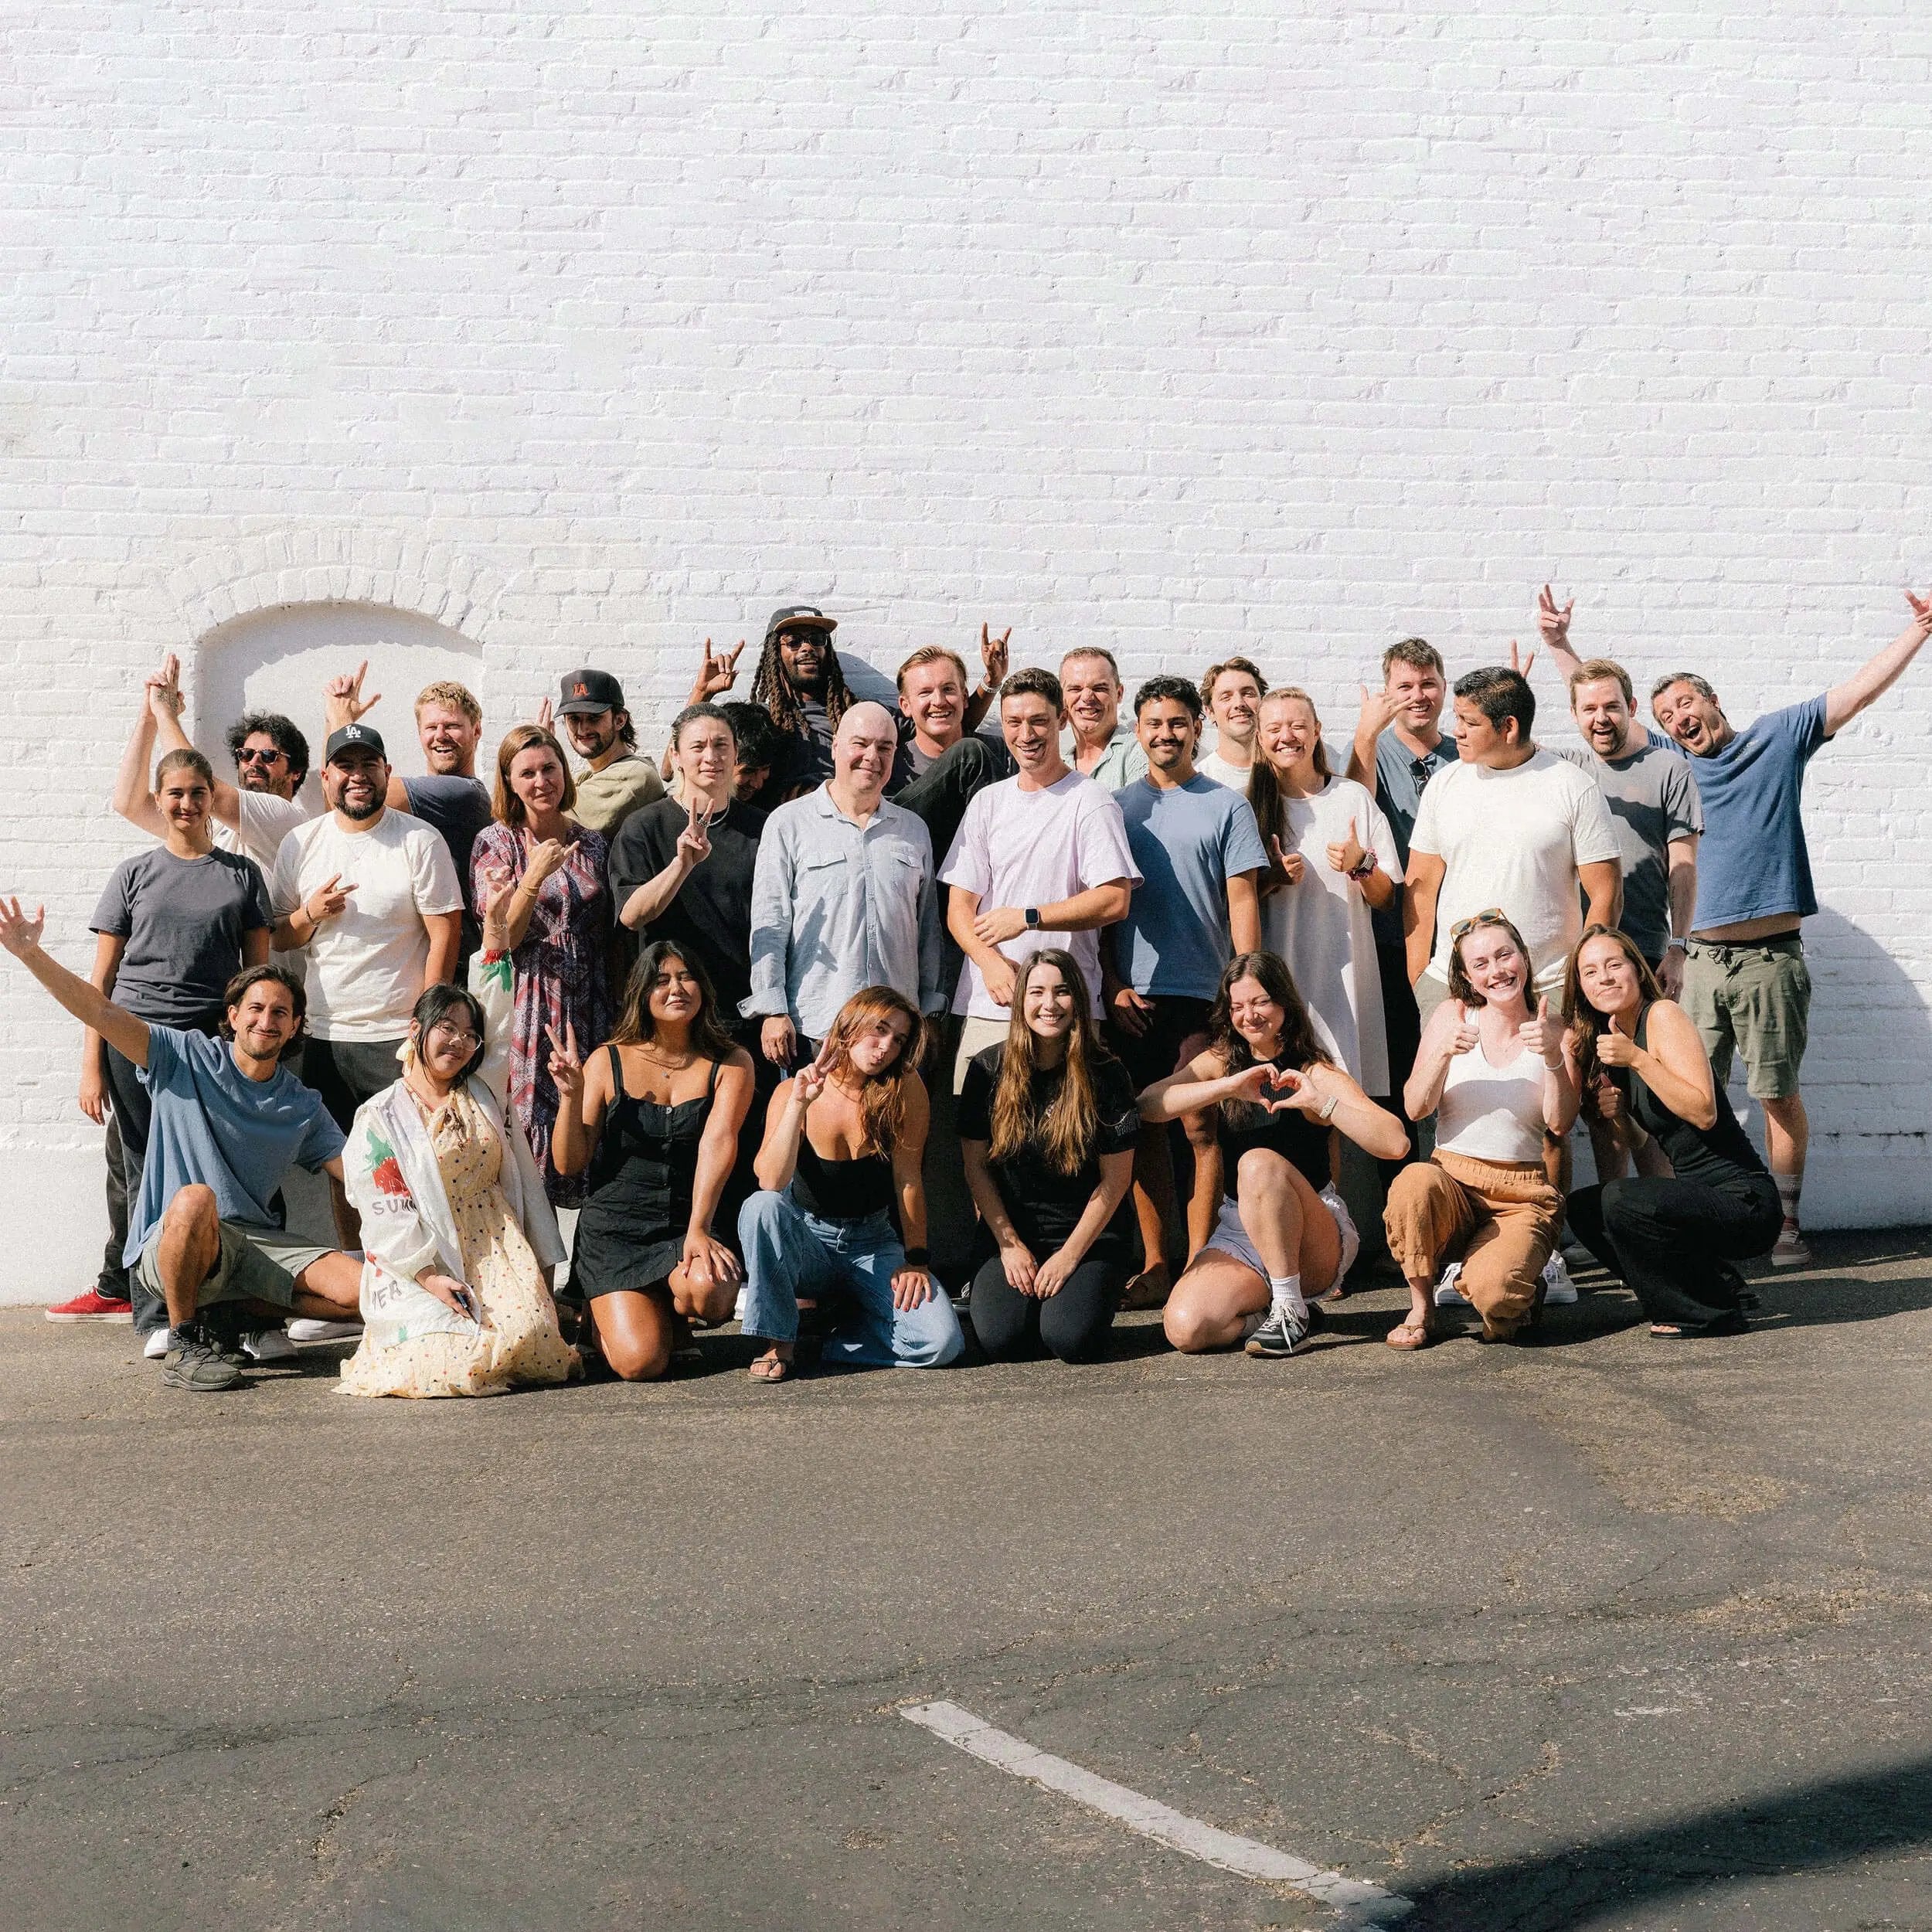 A group photograph of Vidlogix employees on the side of building on a sunny day.